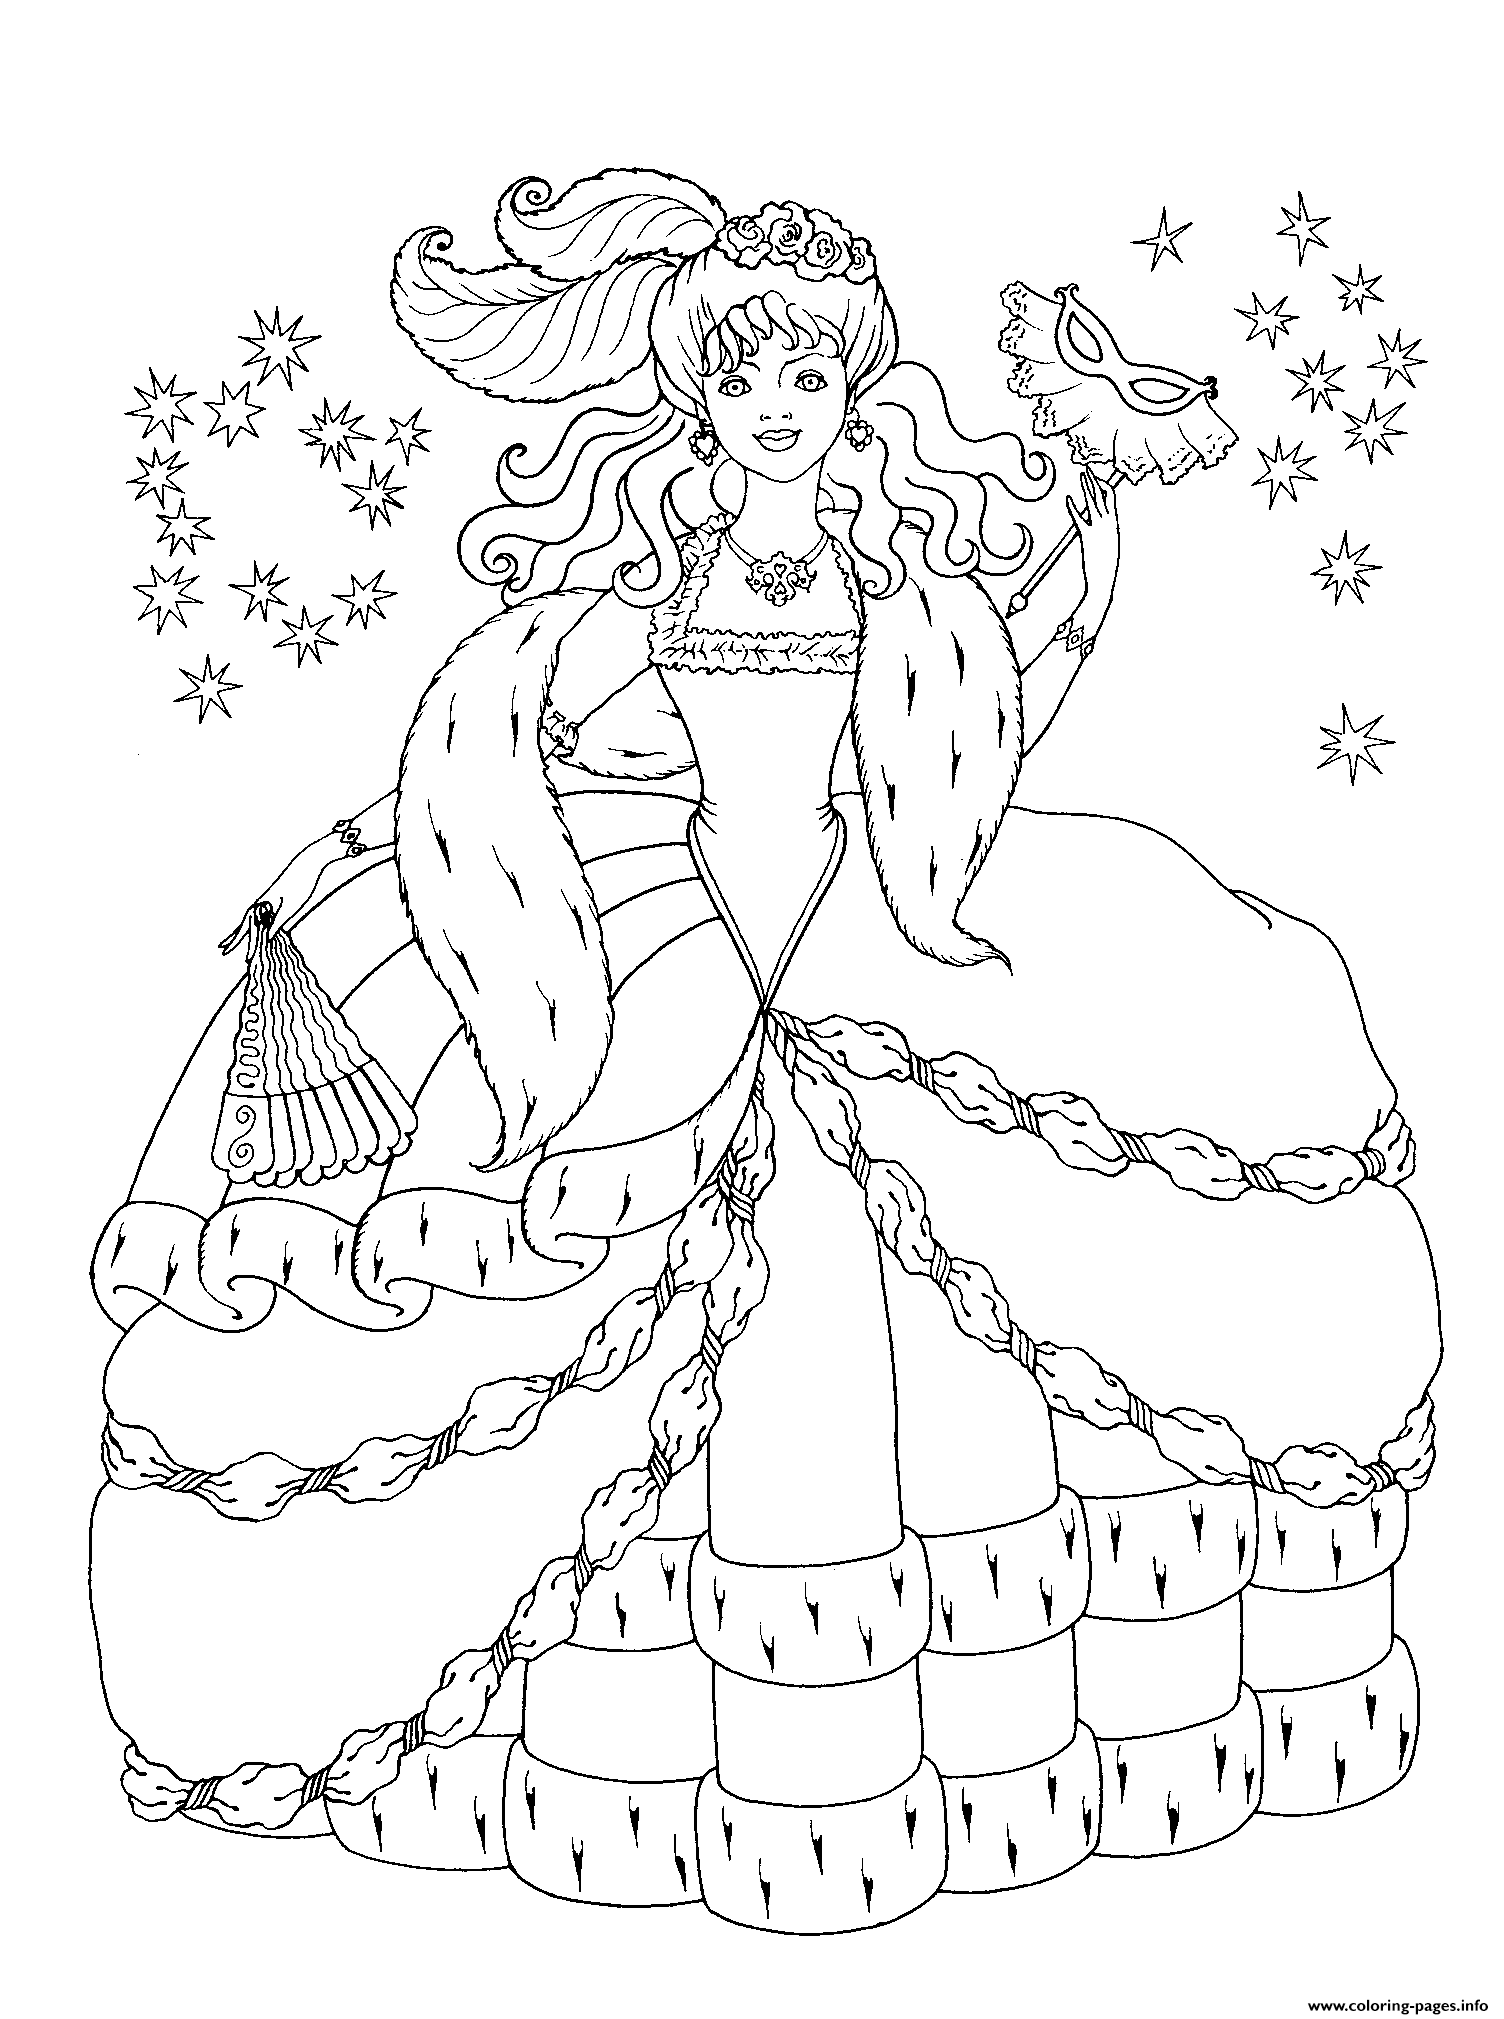 Princess Ready For Party coloring